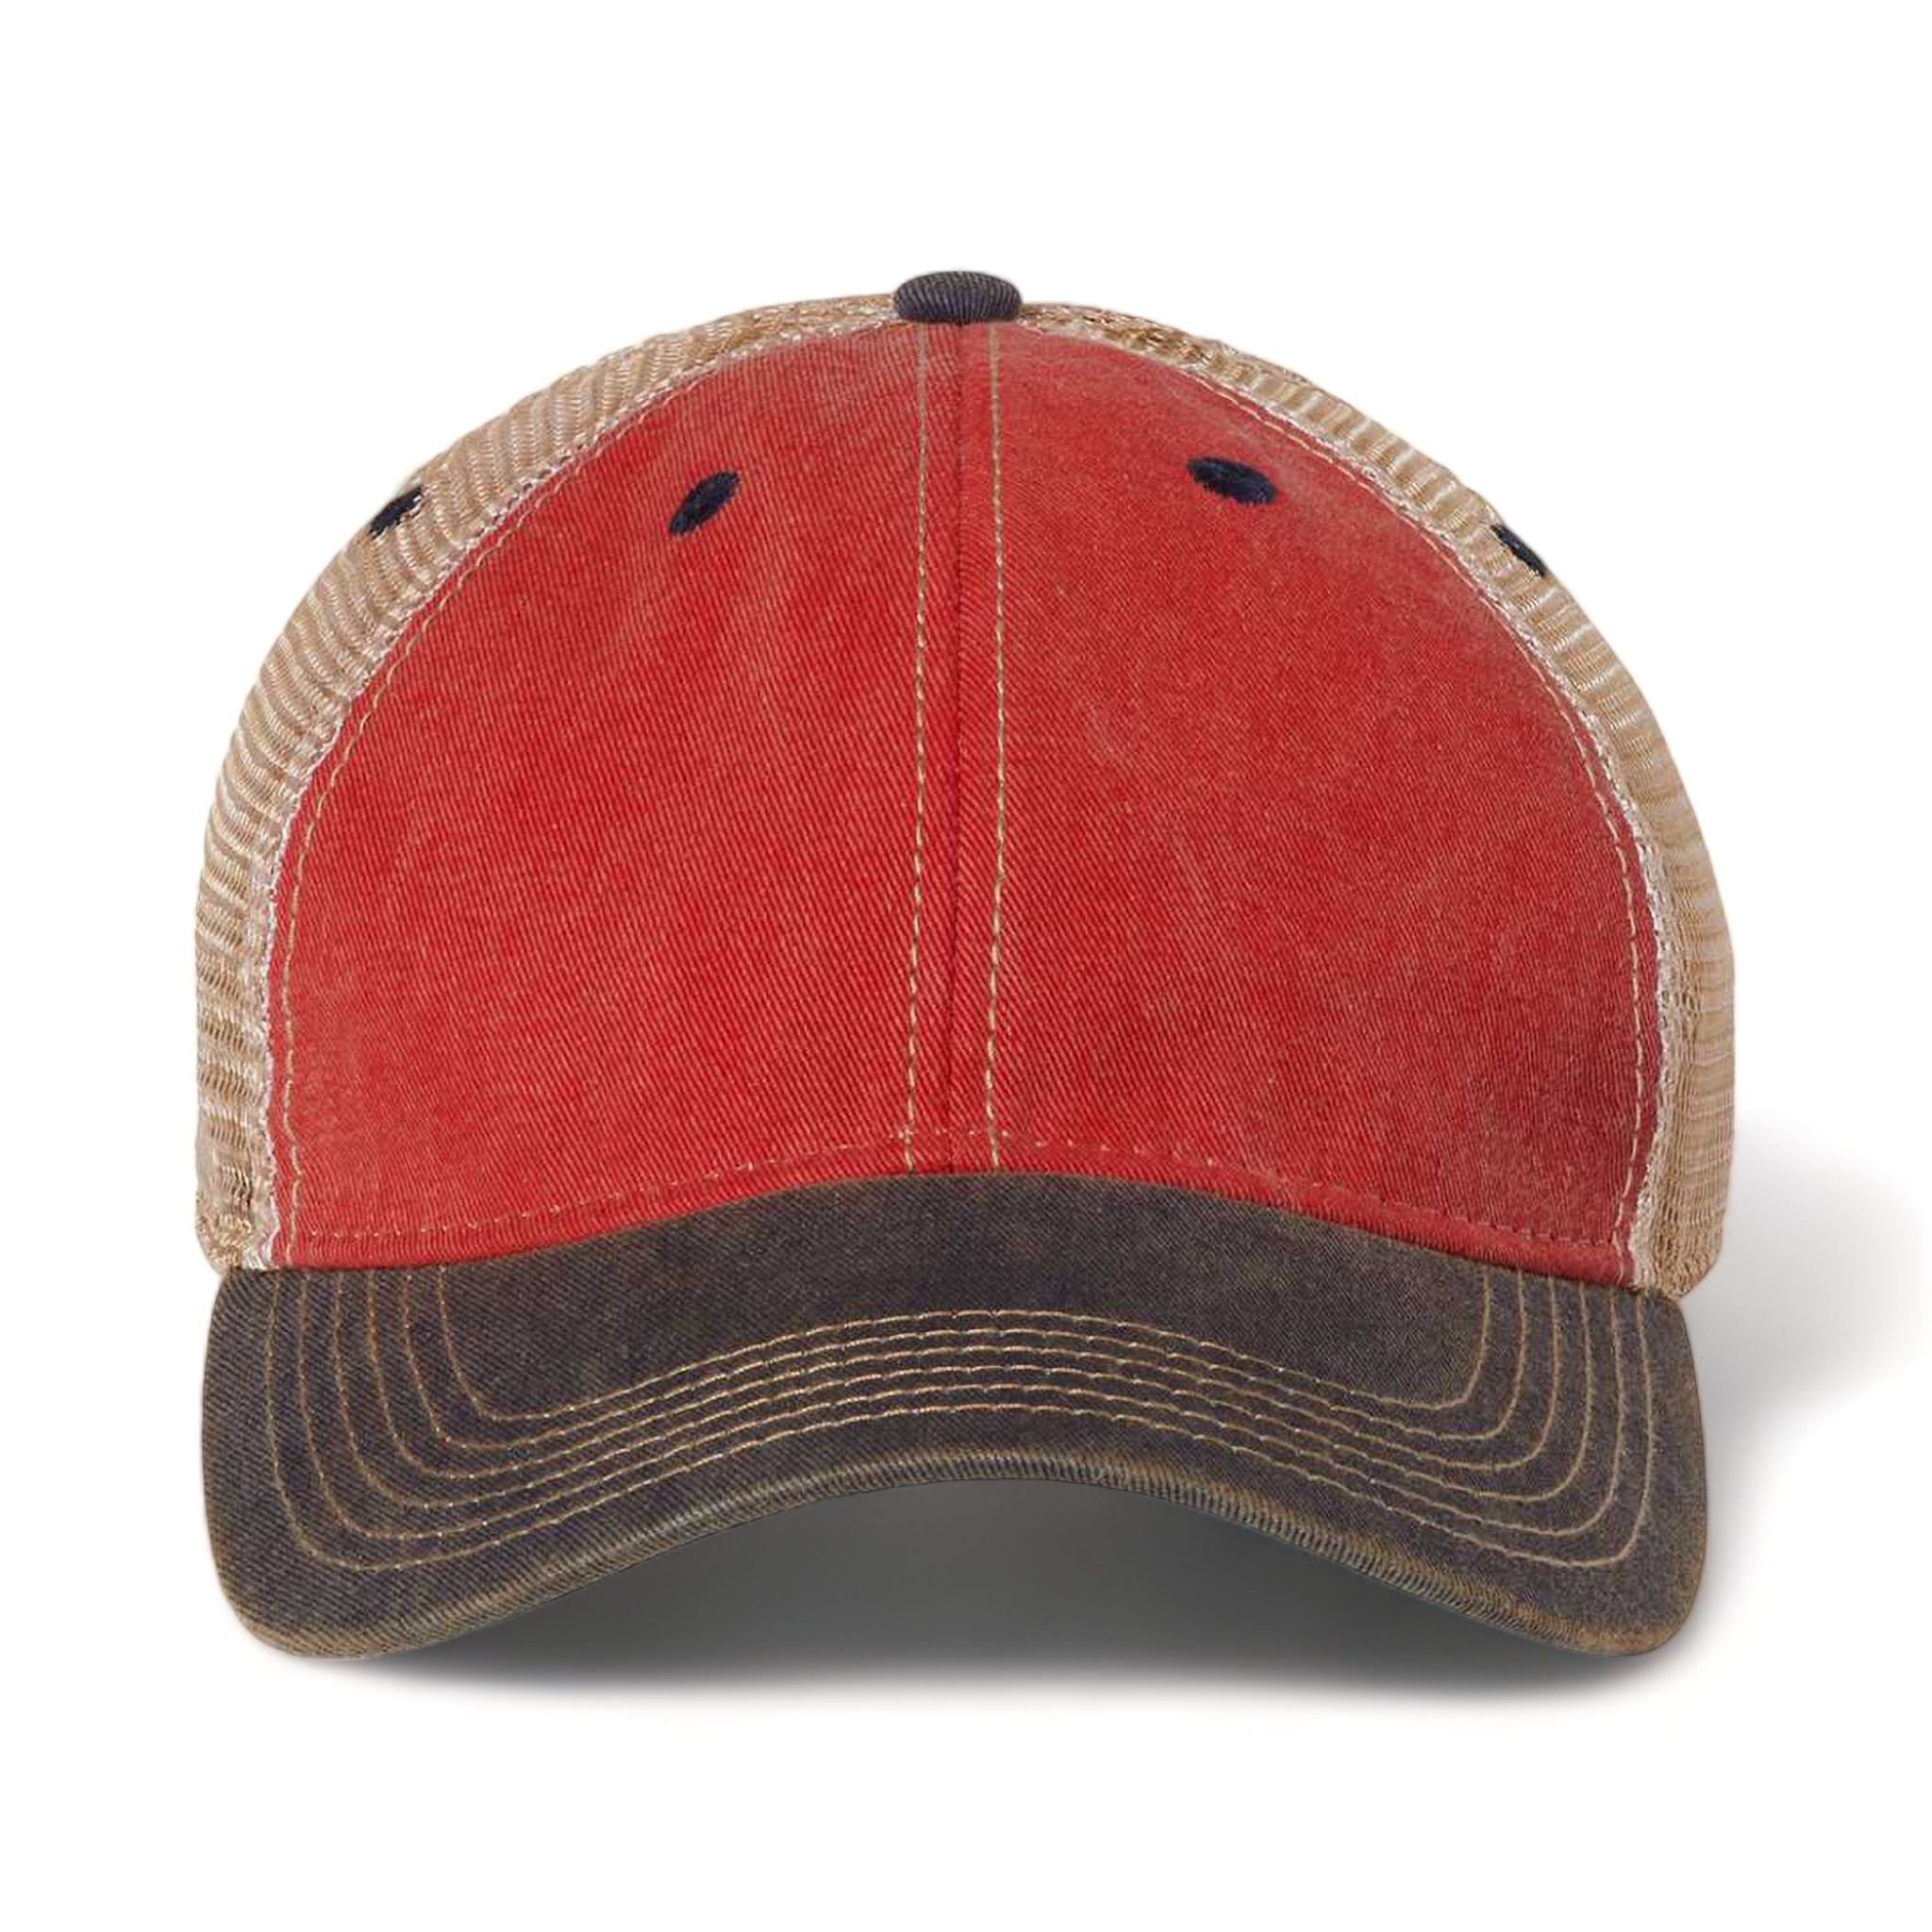 Front view of LEGACY OFA custom hat in scarlet red, navy and khaki